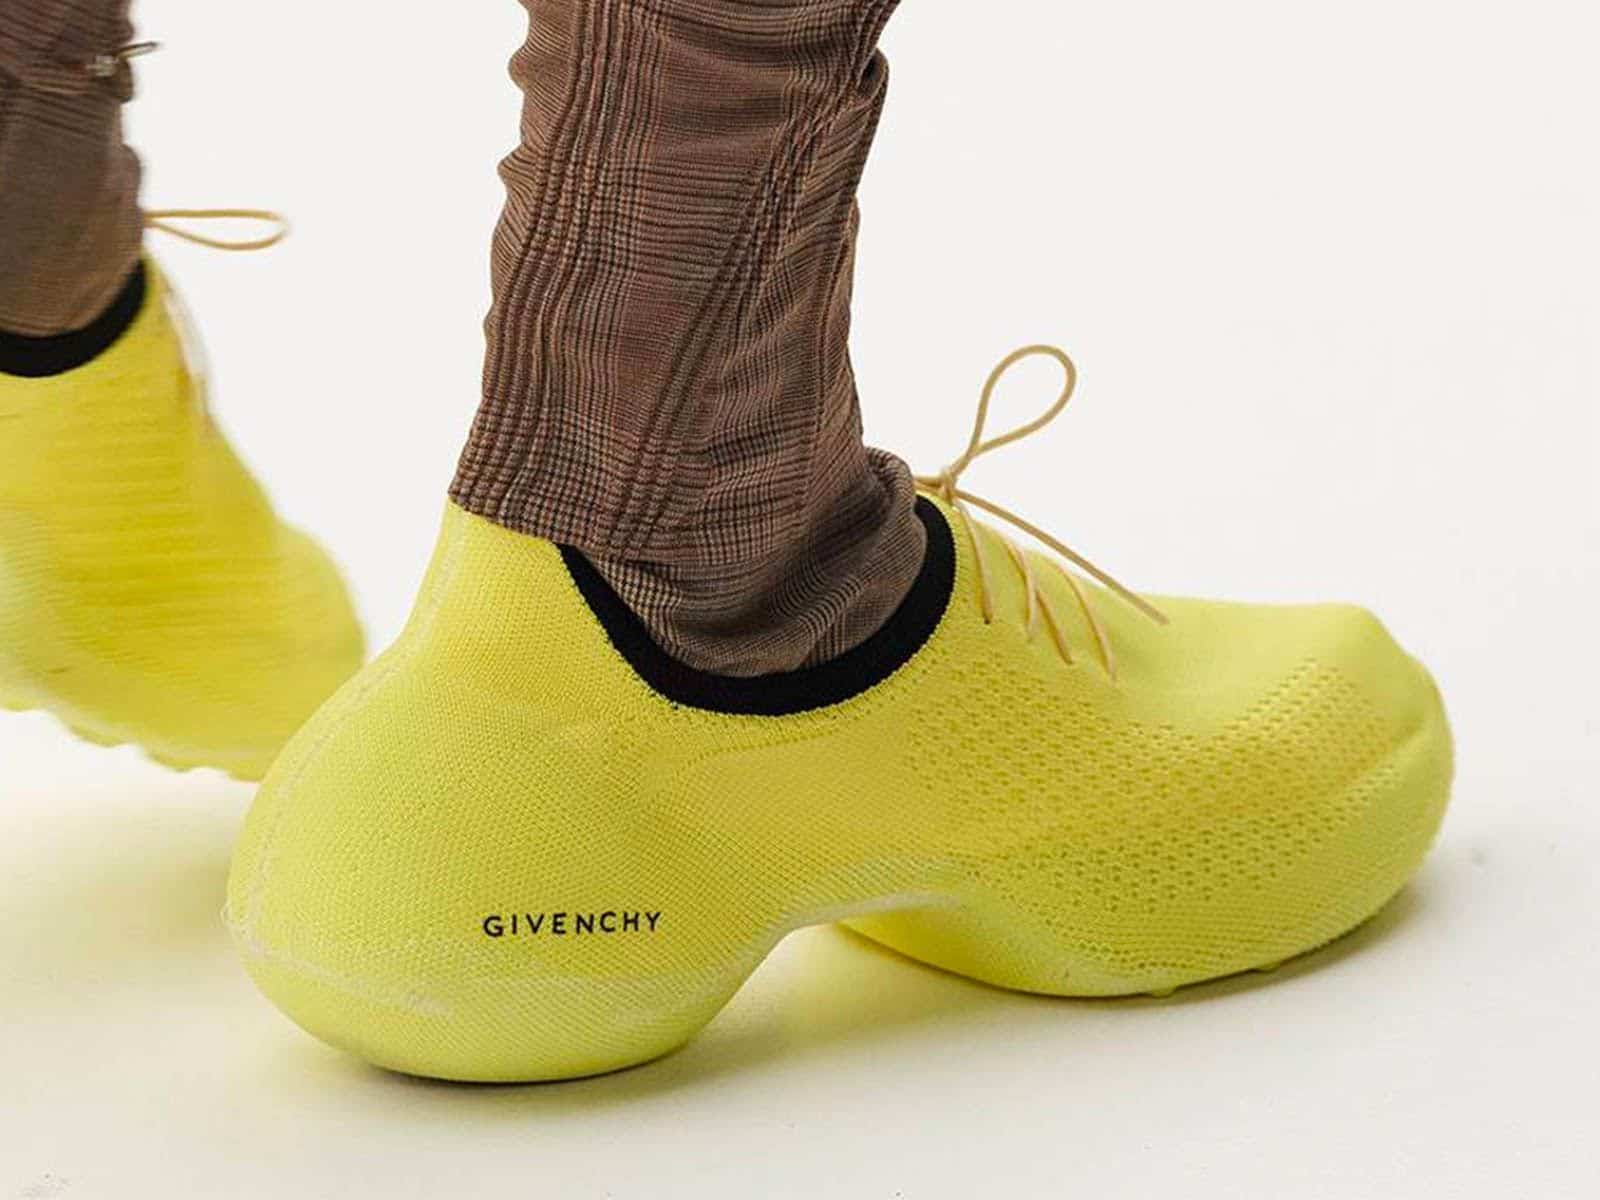 Givenchy TK360 launch date now available